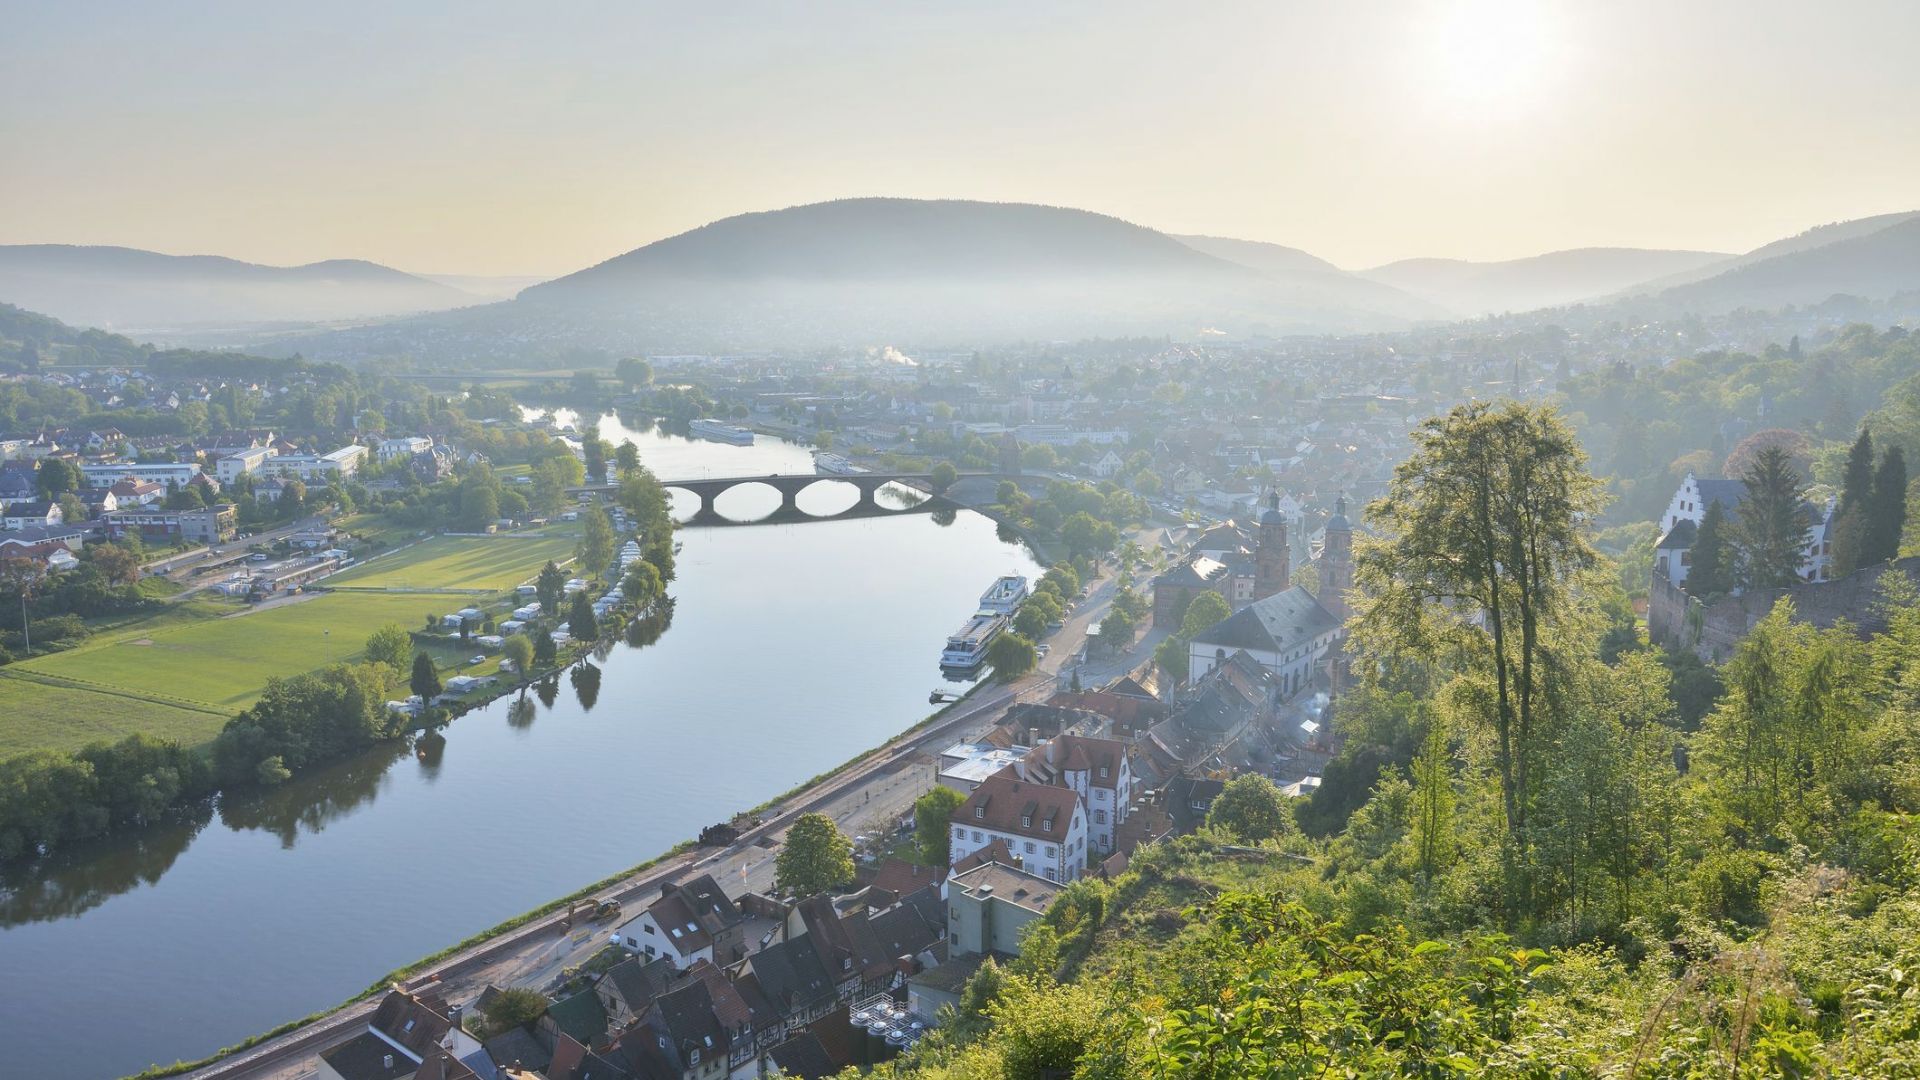 Miltenberg/Main: View over the Main Valley to the Spessart Mountains